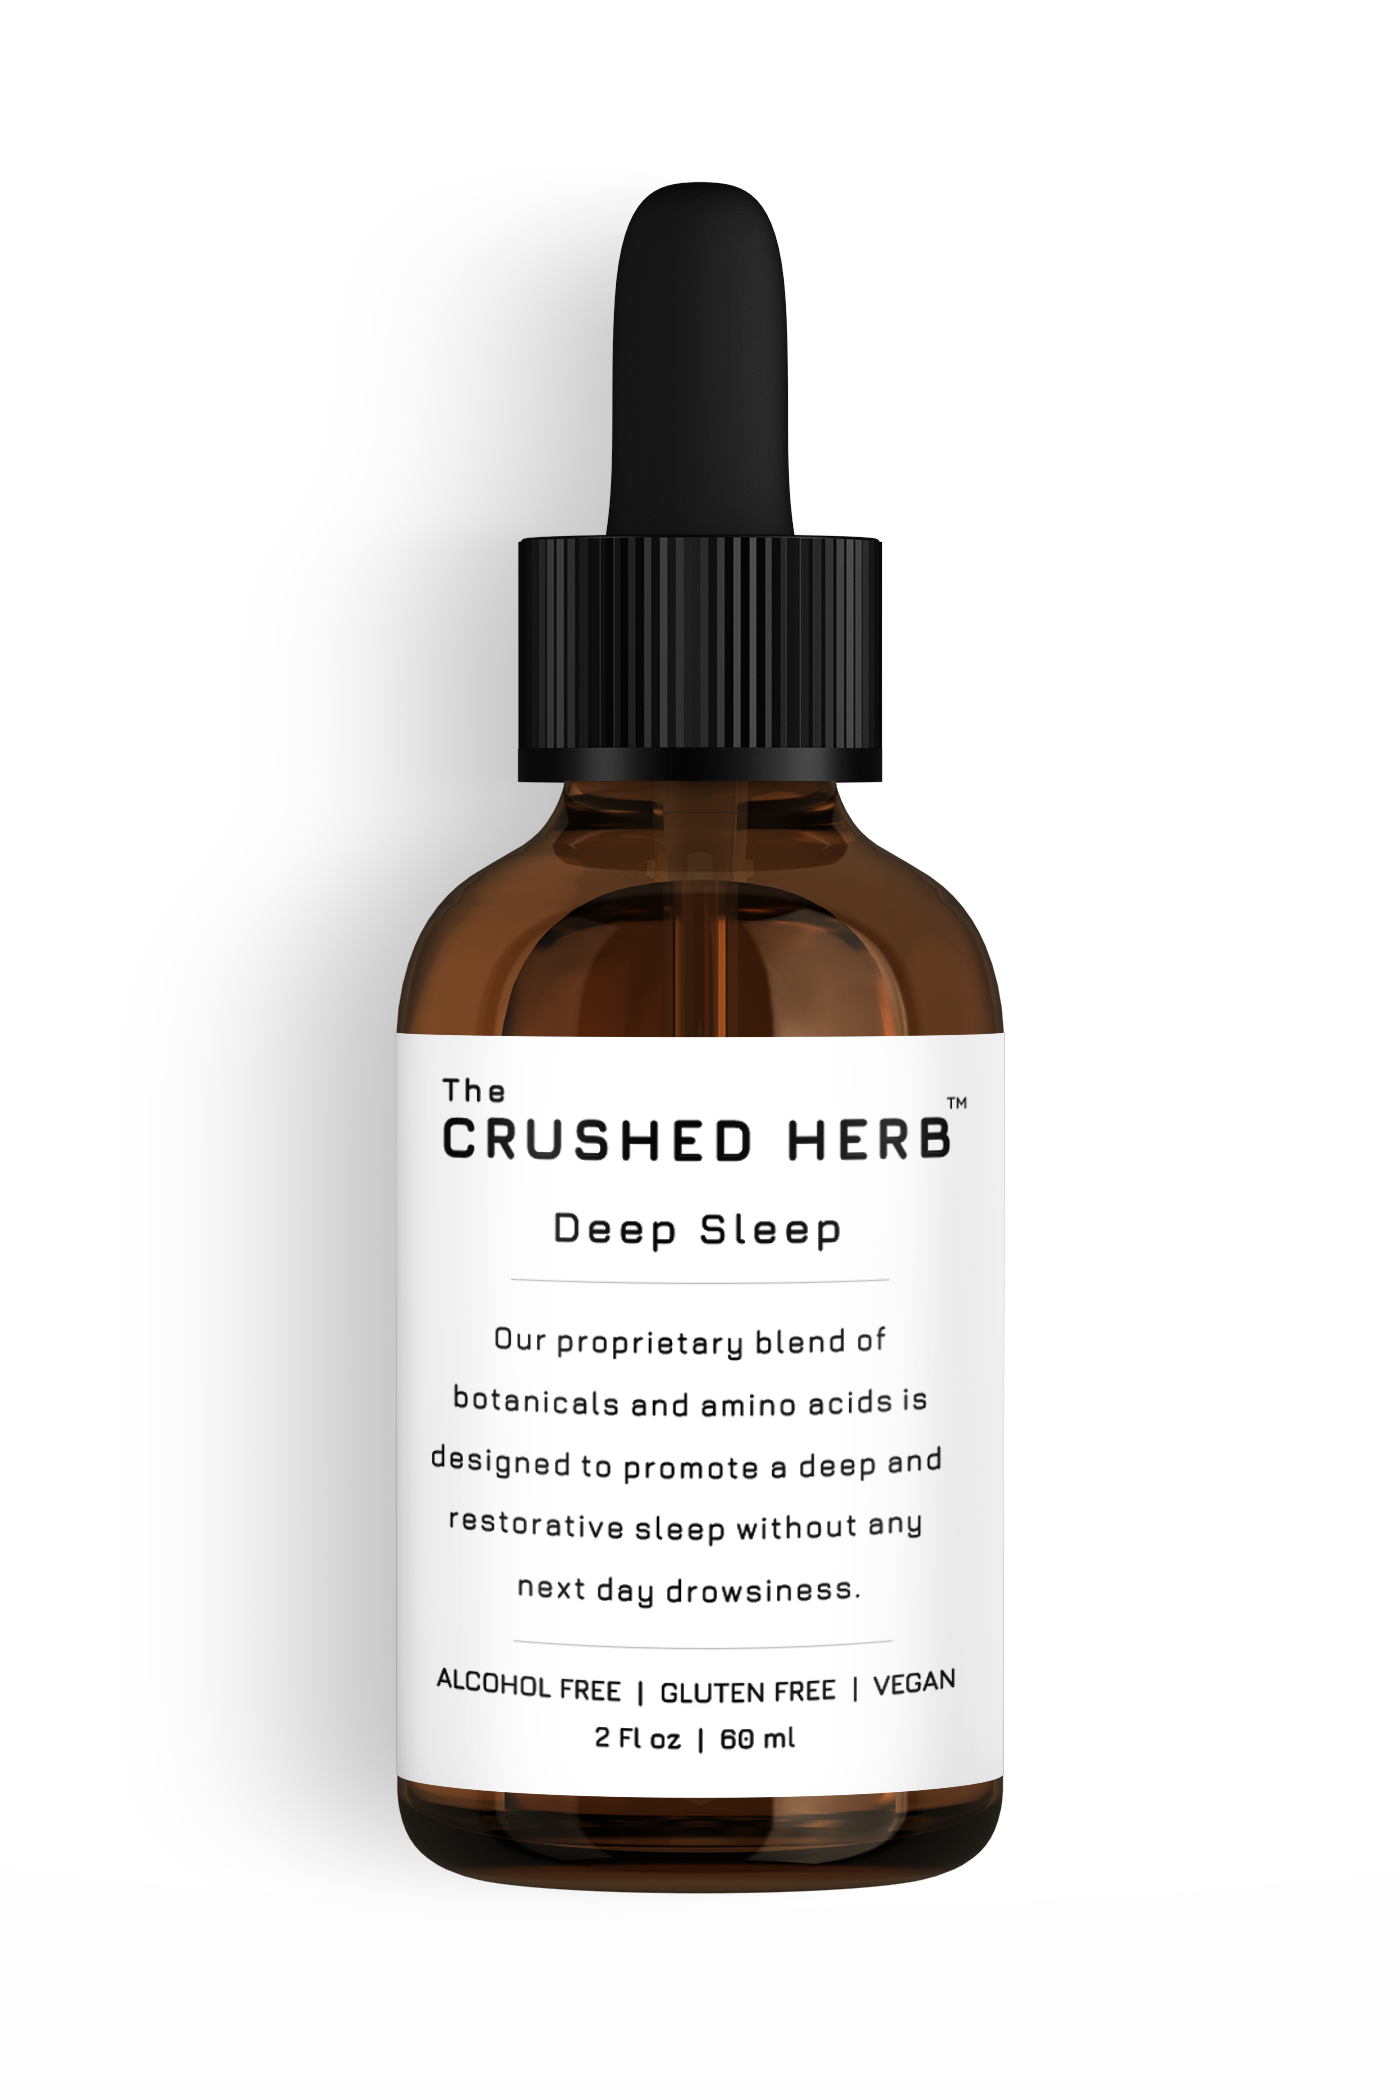 Deep Sleep - A natural solution for restful nights by The Crushed Herb